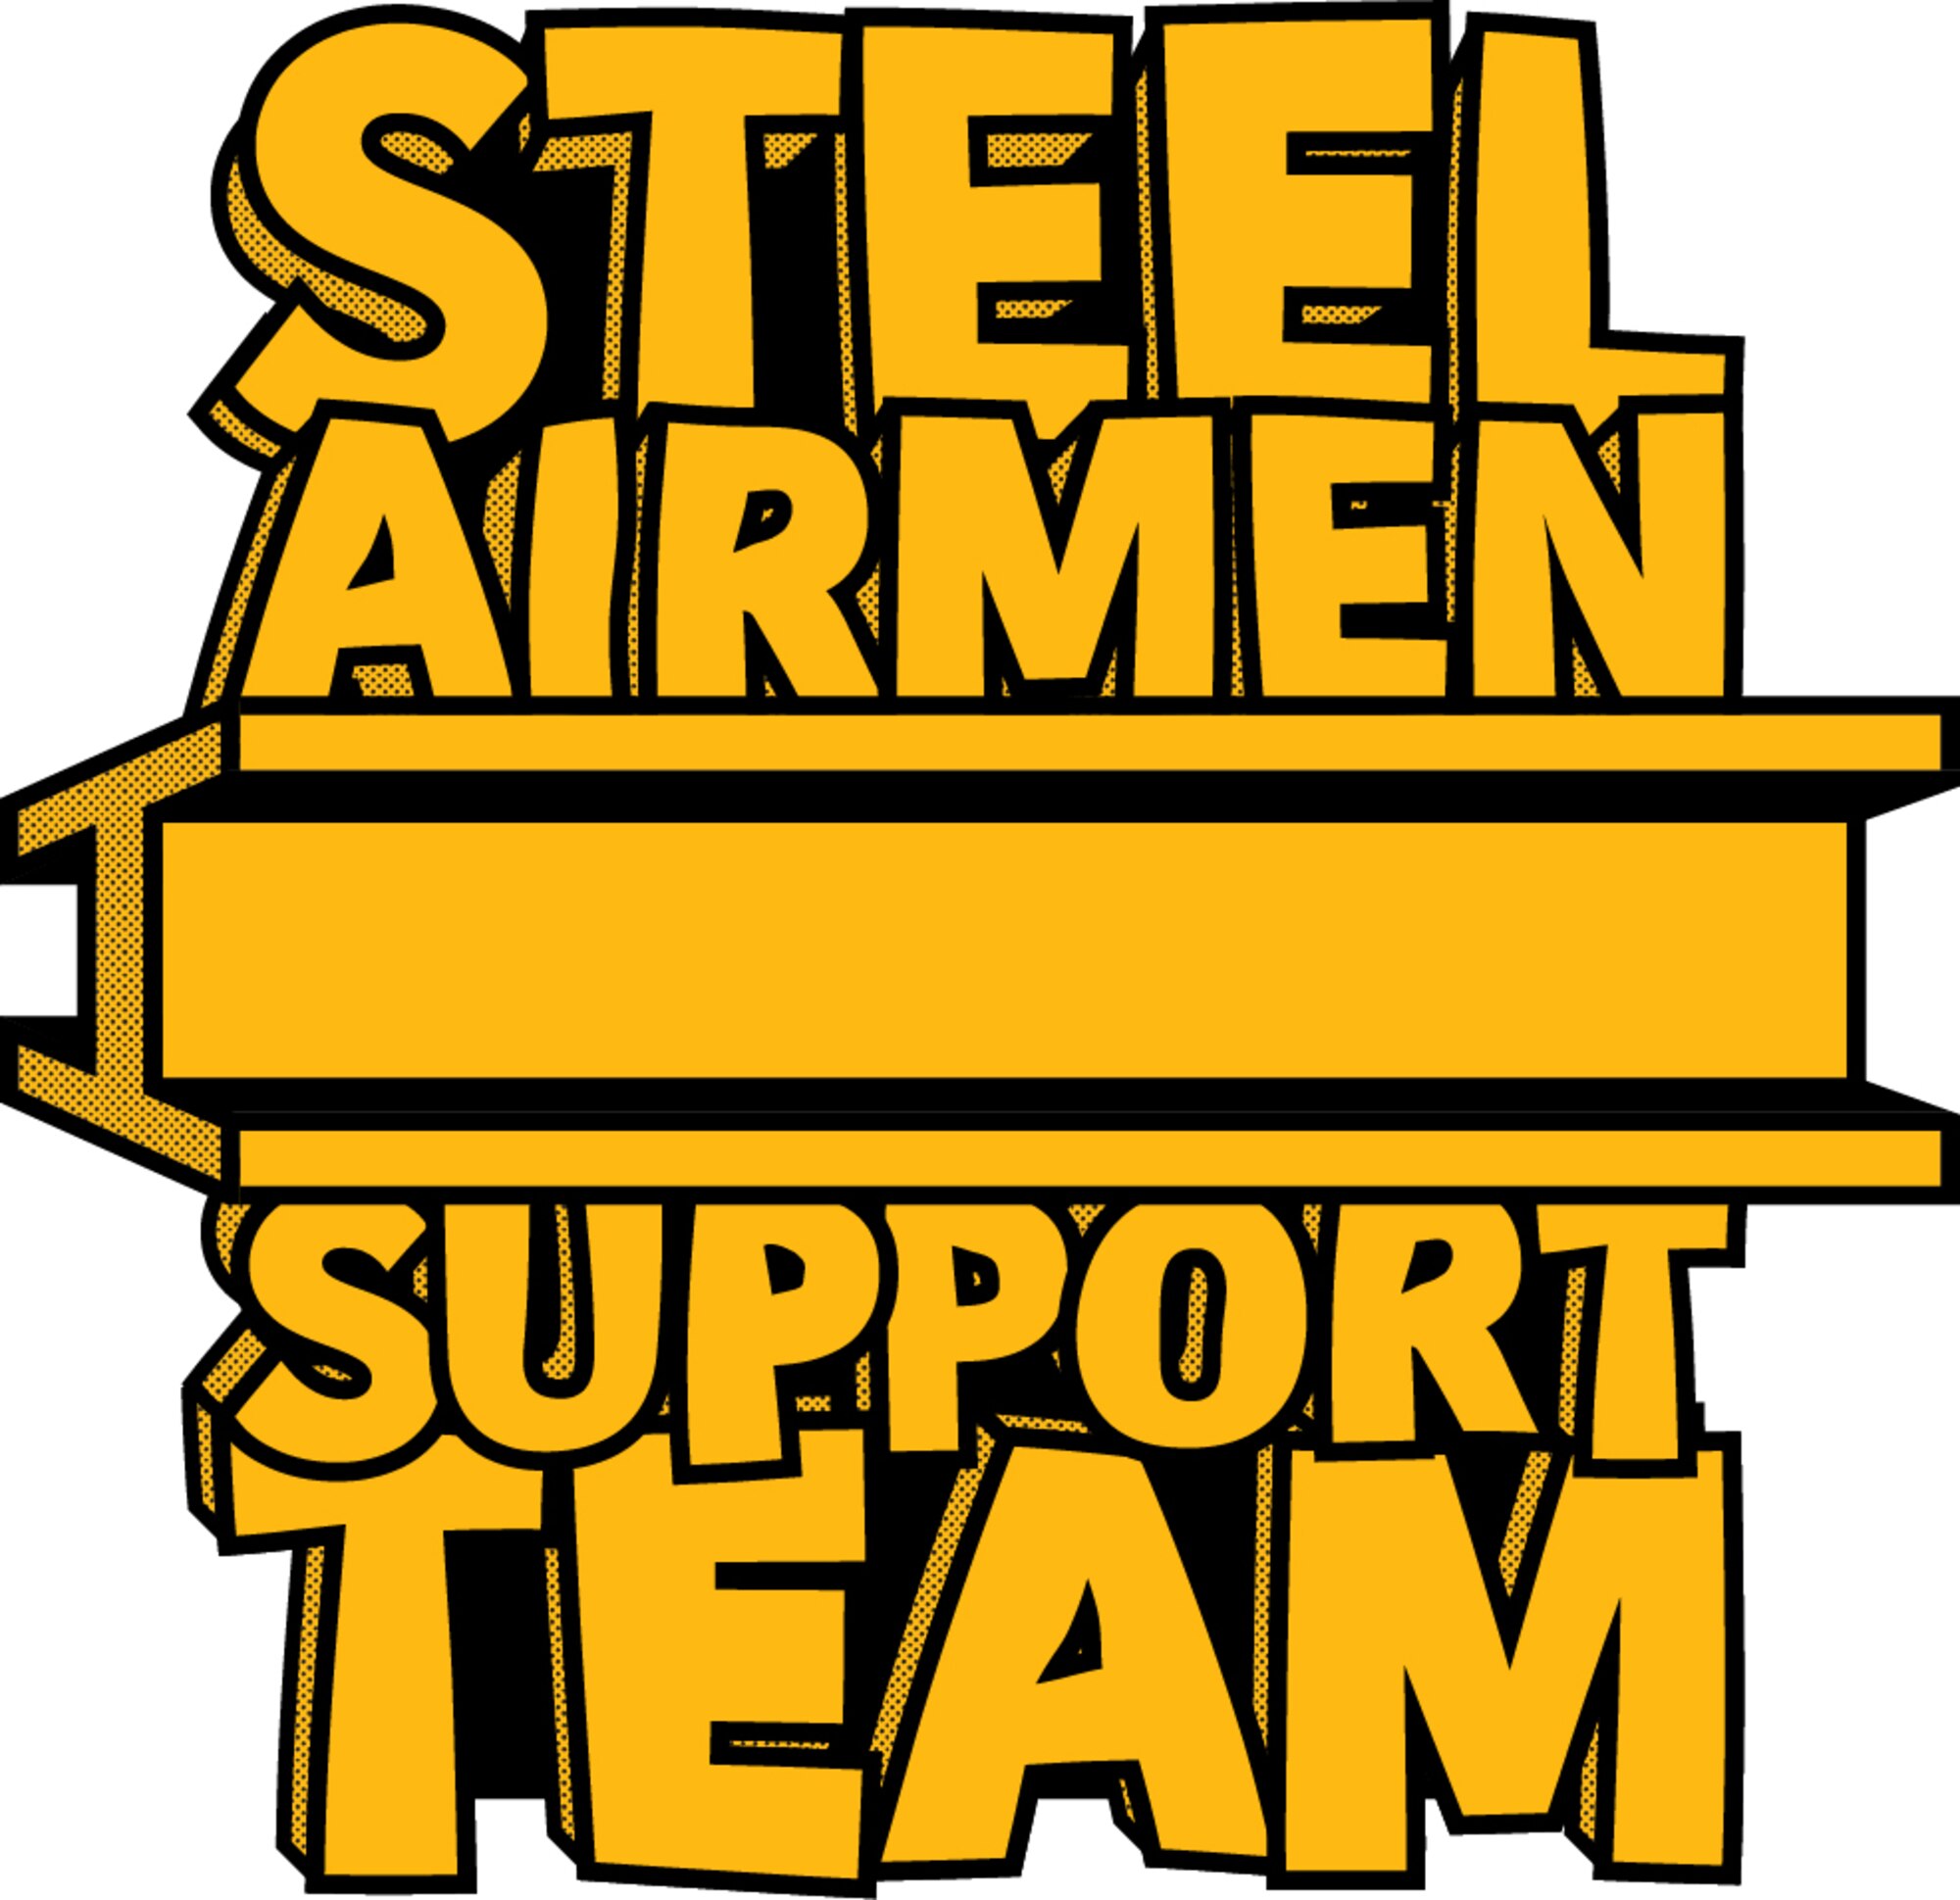 Yellow block letter text with a black outline, reading "Steel Airmen Support Team"